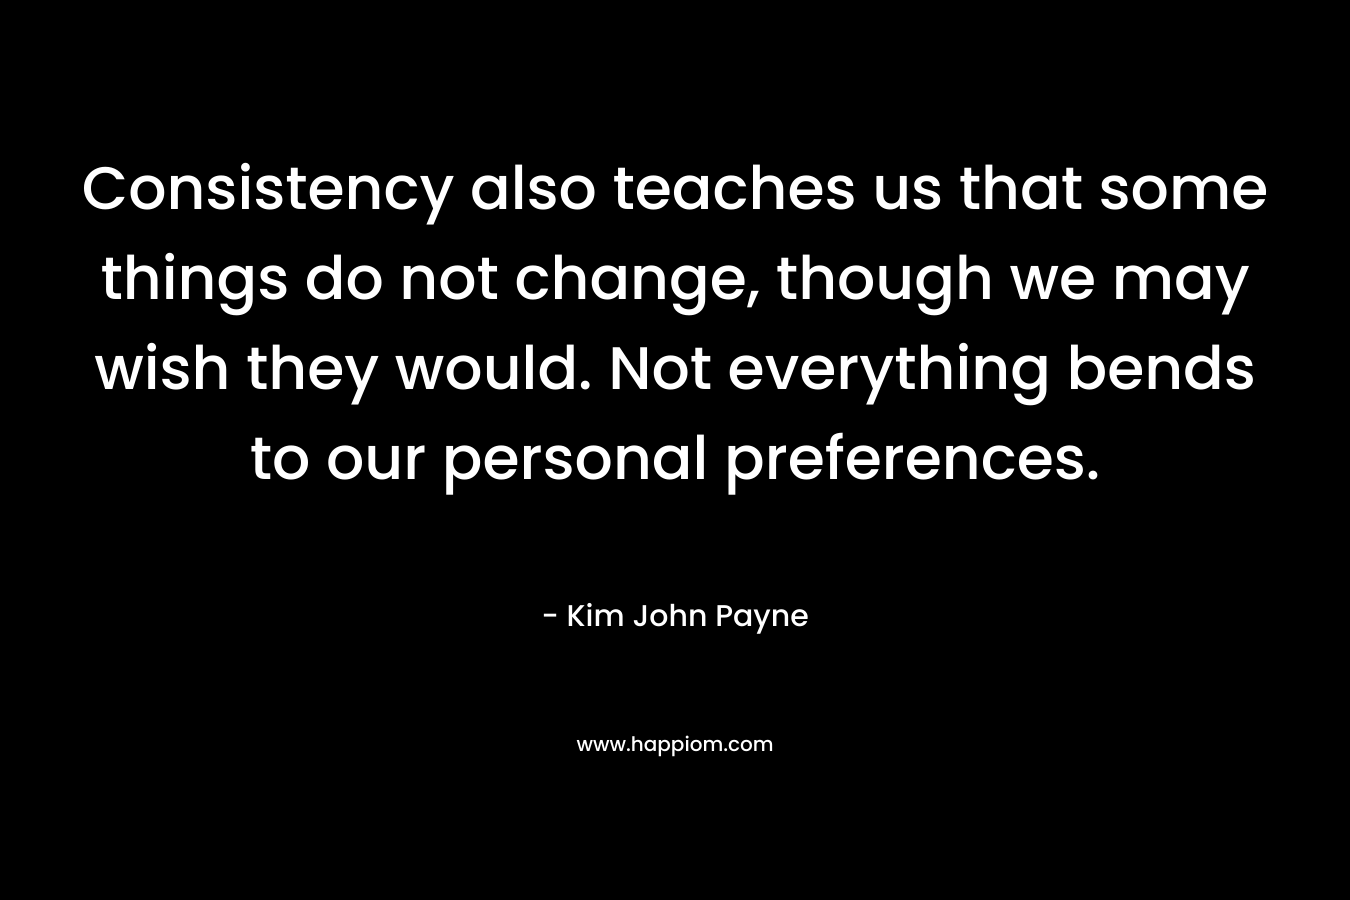 Consistency also teaches us that some things do not change, though we may wish they would. Not everything bends to our personal preferences. – Kim John Payne